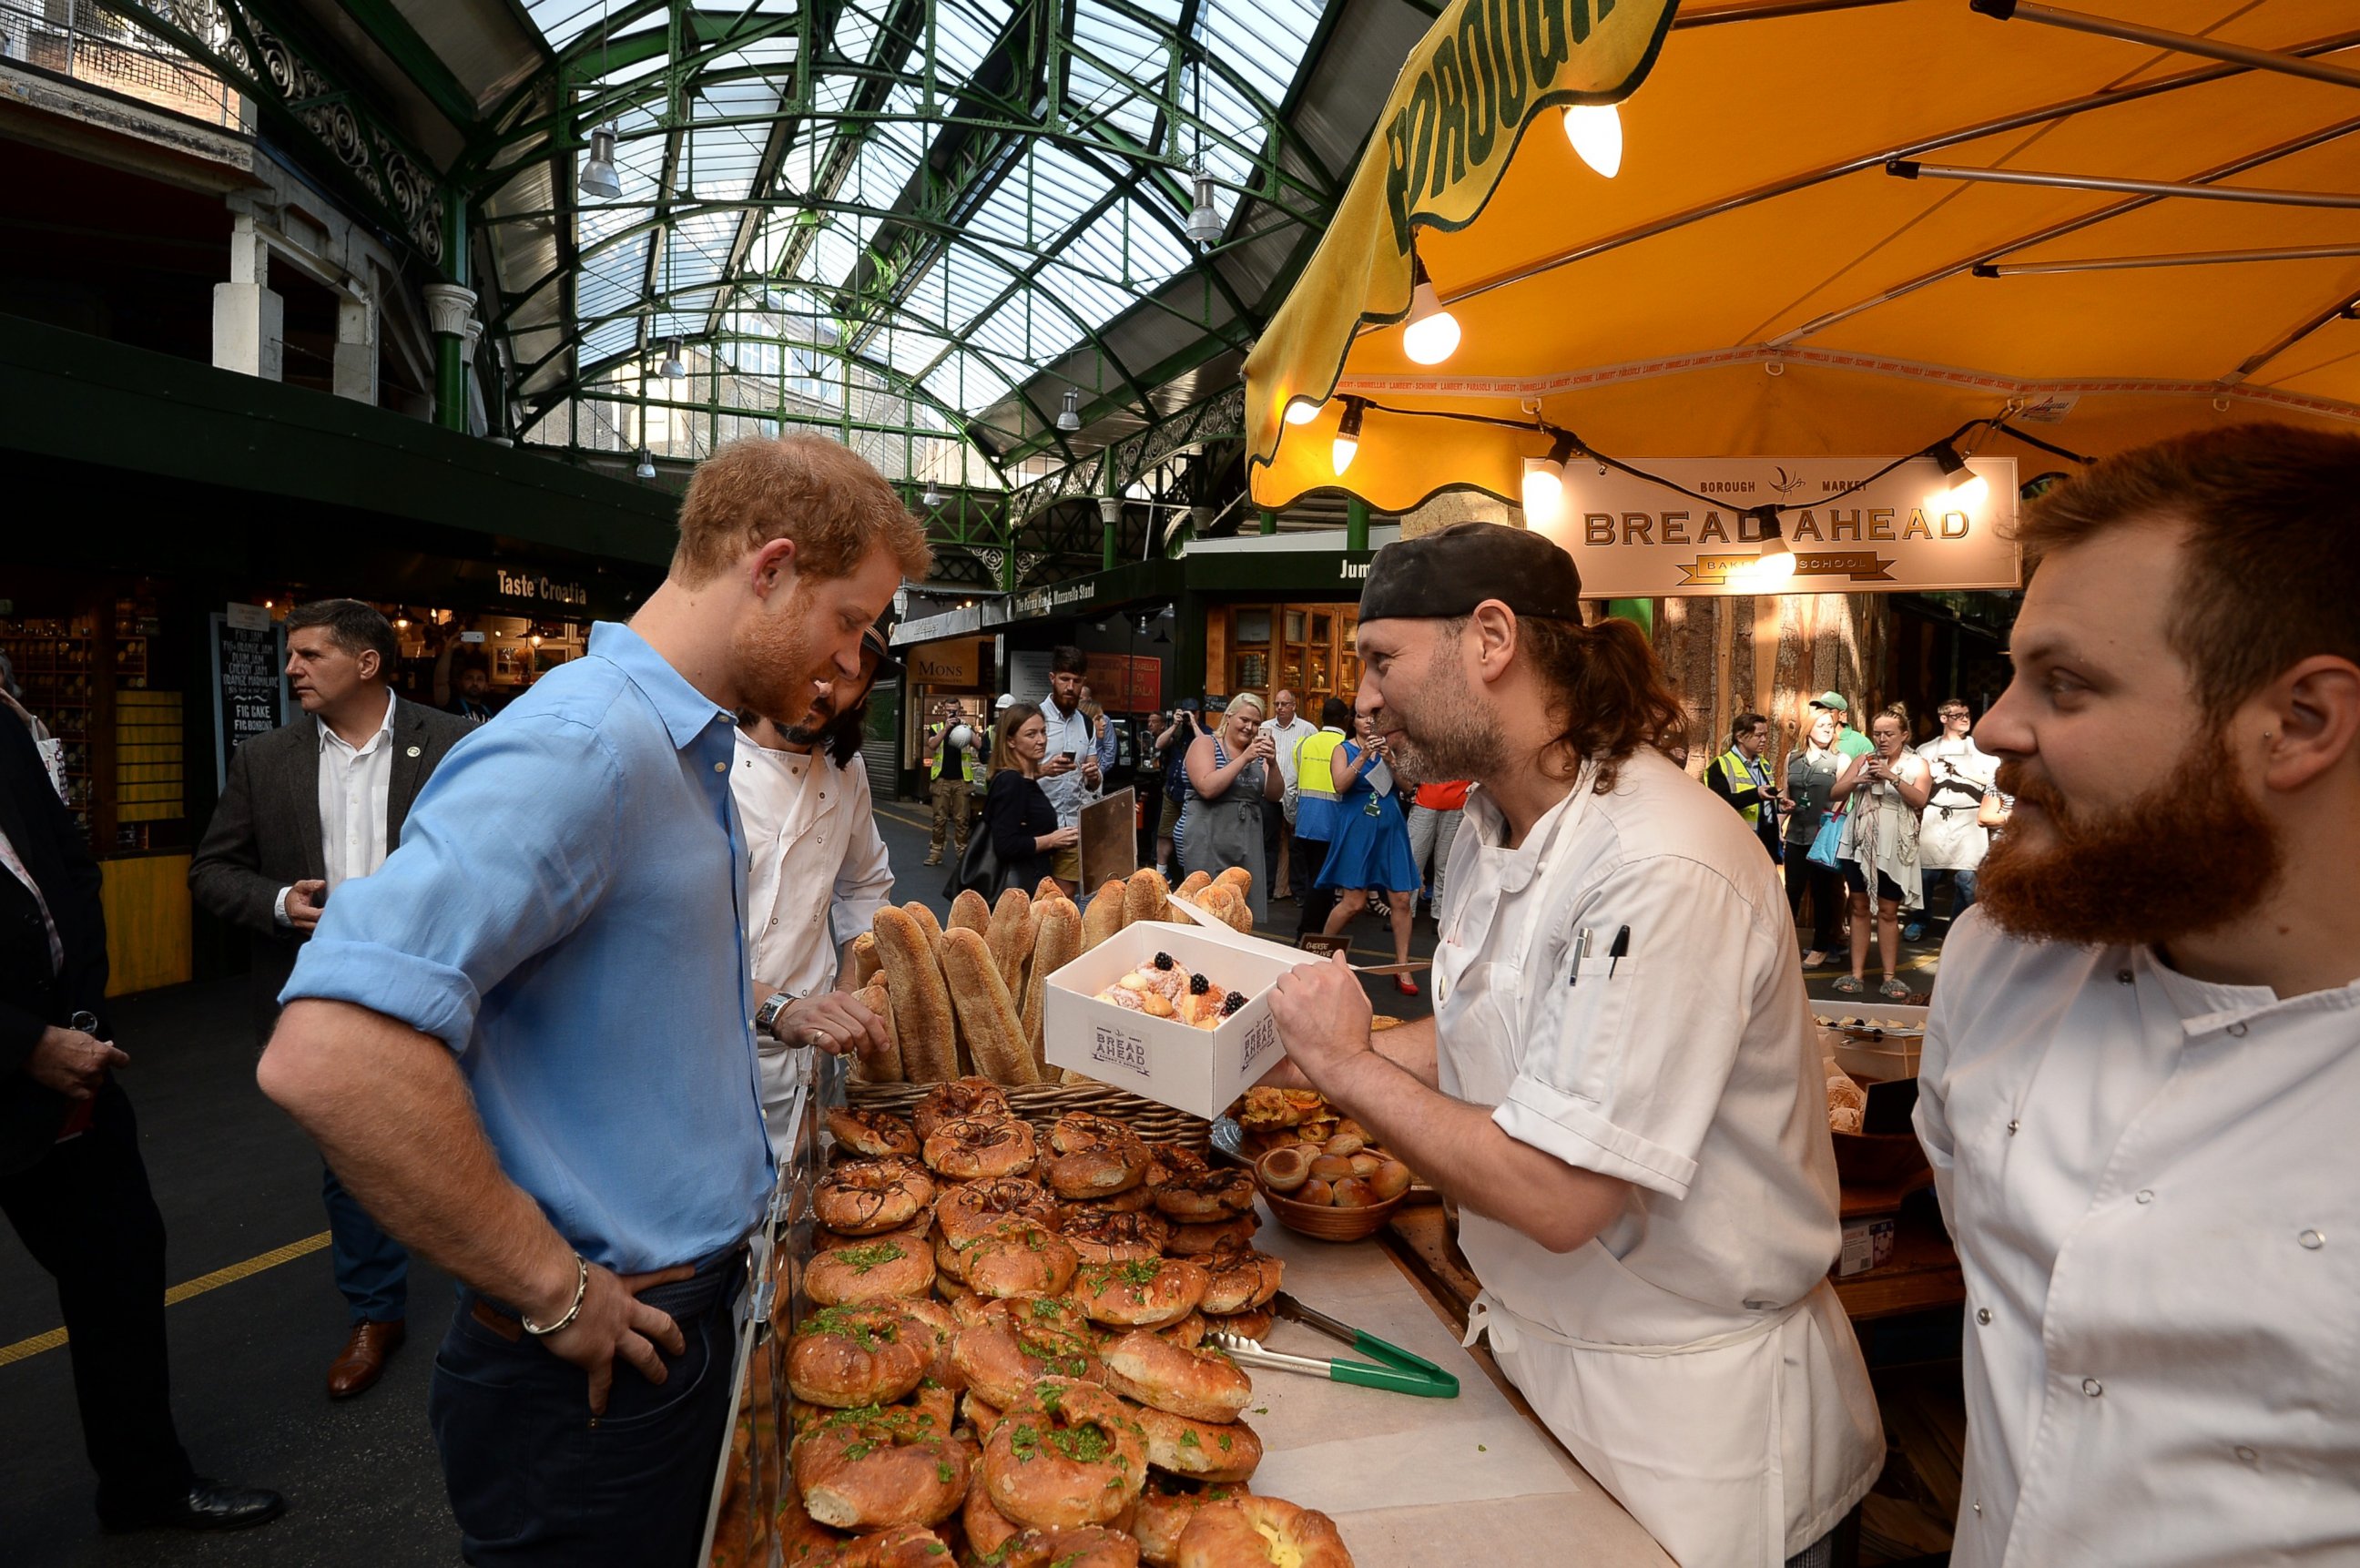 PHOTO: Prince Harry buys doughnuts from "Bread Ahead" stall during a visit to Borough Market in London, which has opened yesterday for the first time since the London Bridge terrorist attack, June 15, 2017. 